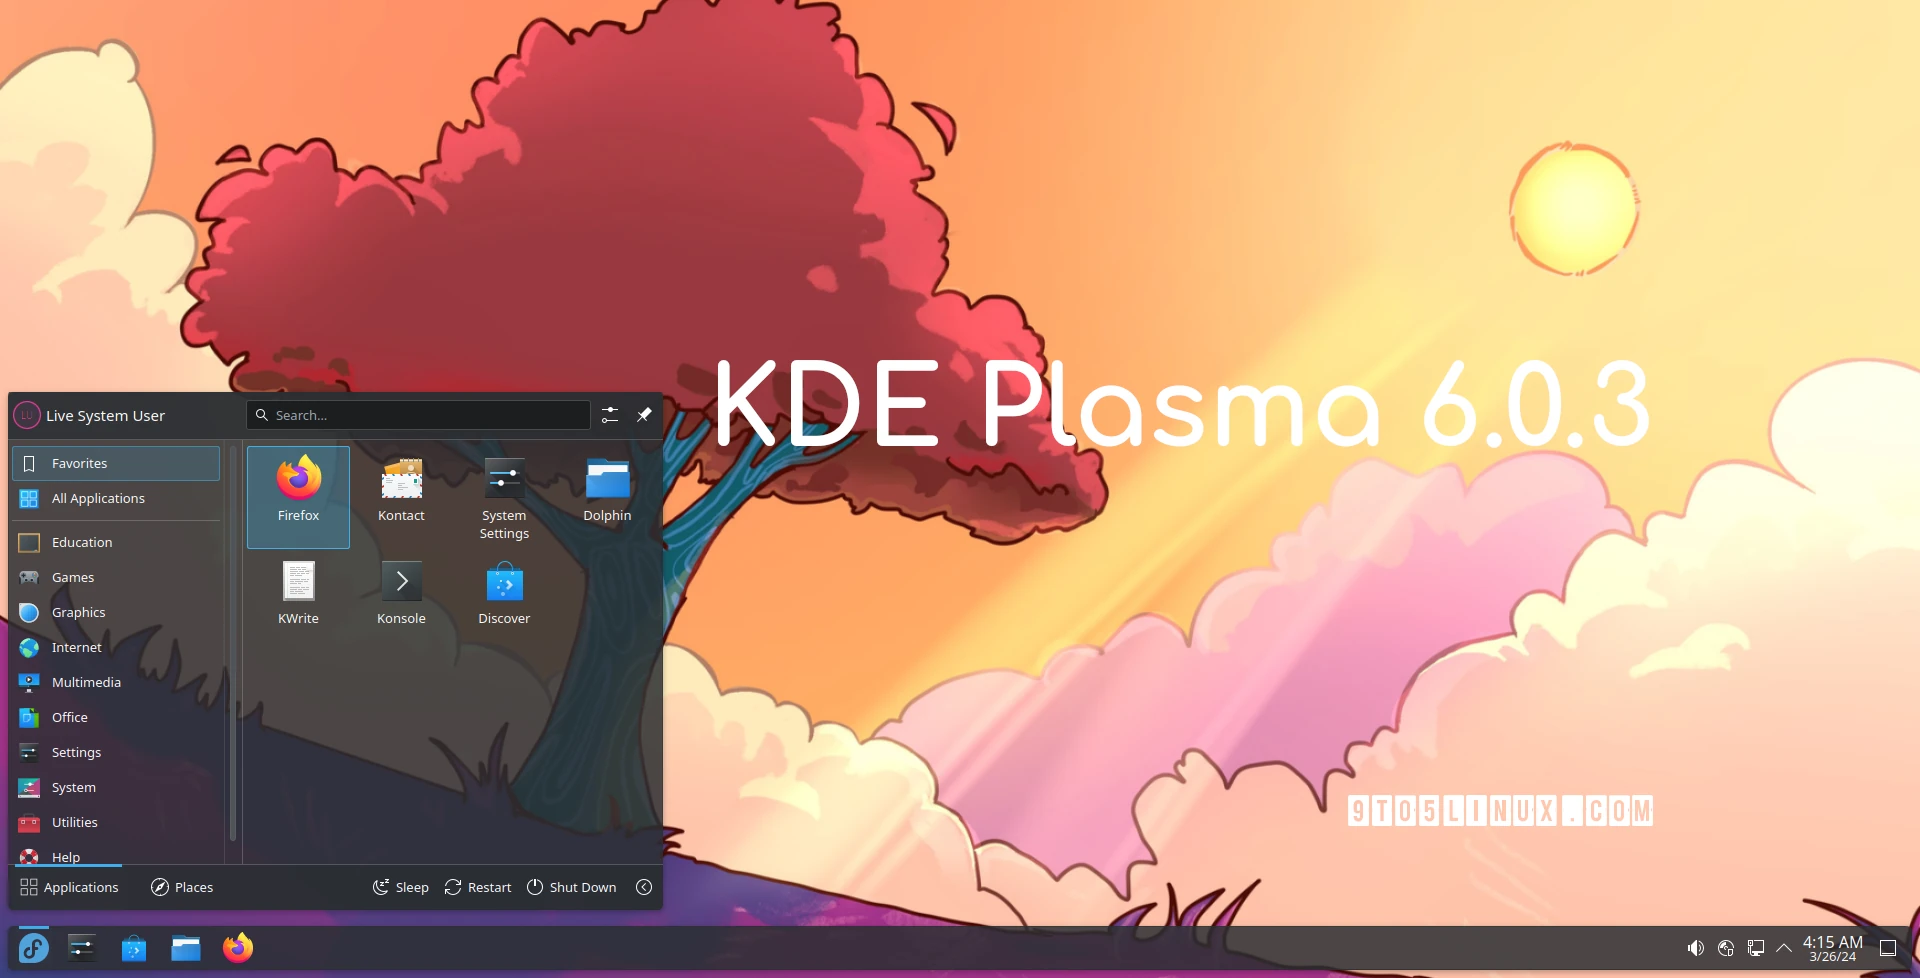 KDE Plasma 6.0.3 Is Here to Fix Some X11 Regressions and Various Crashes